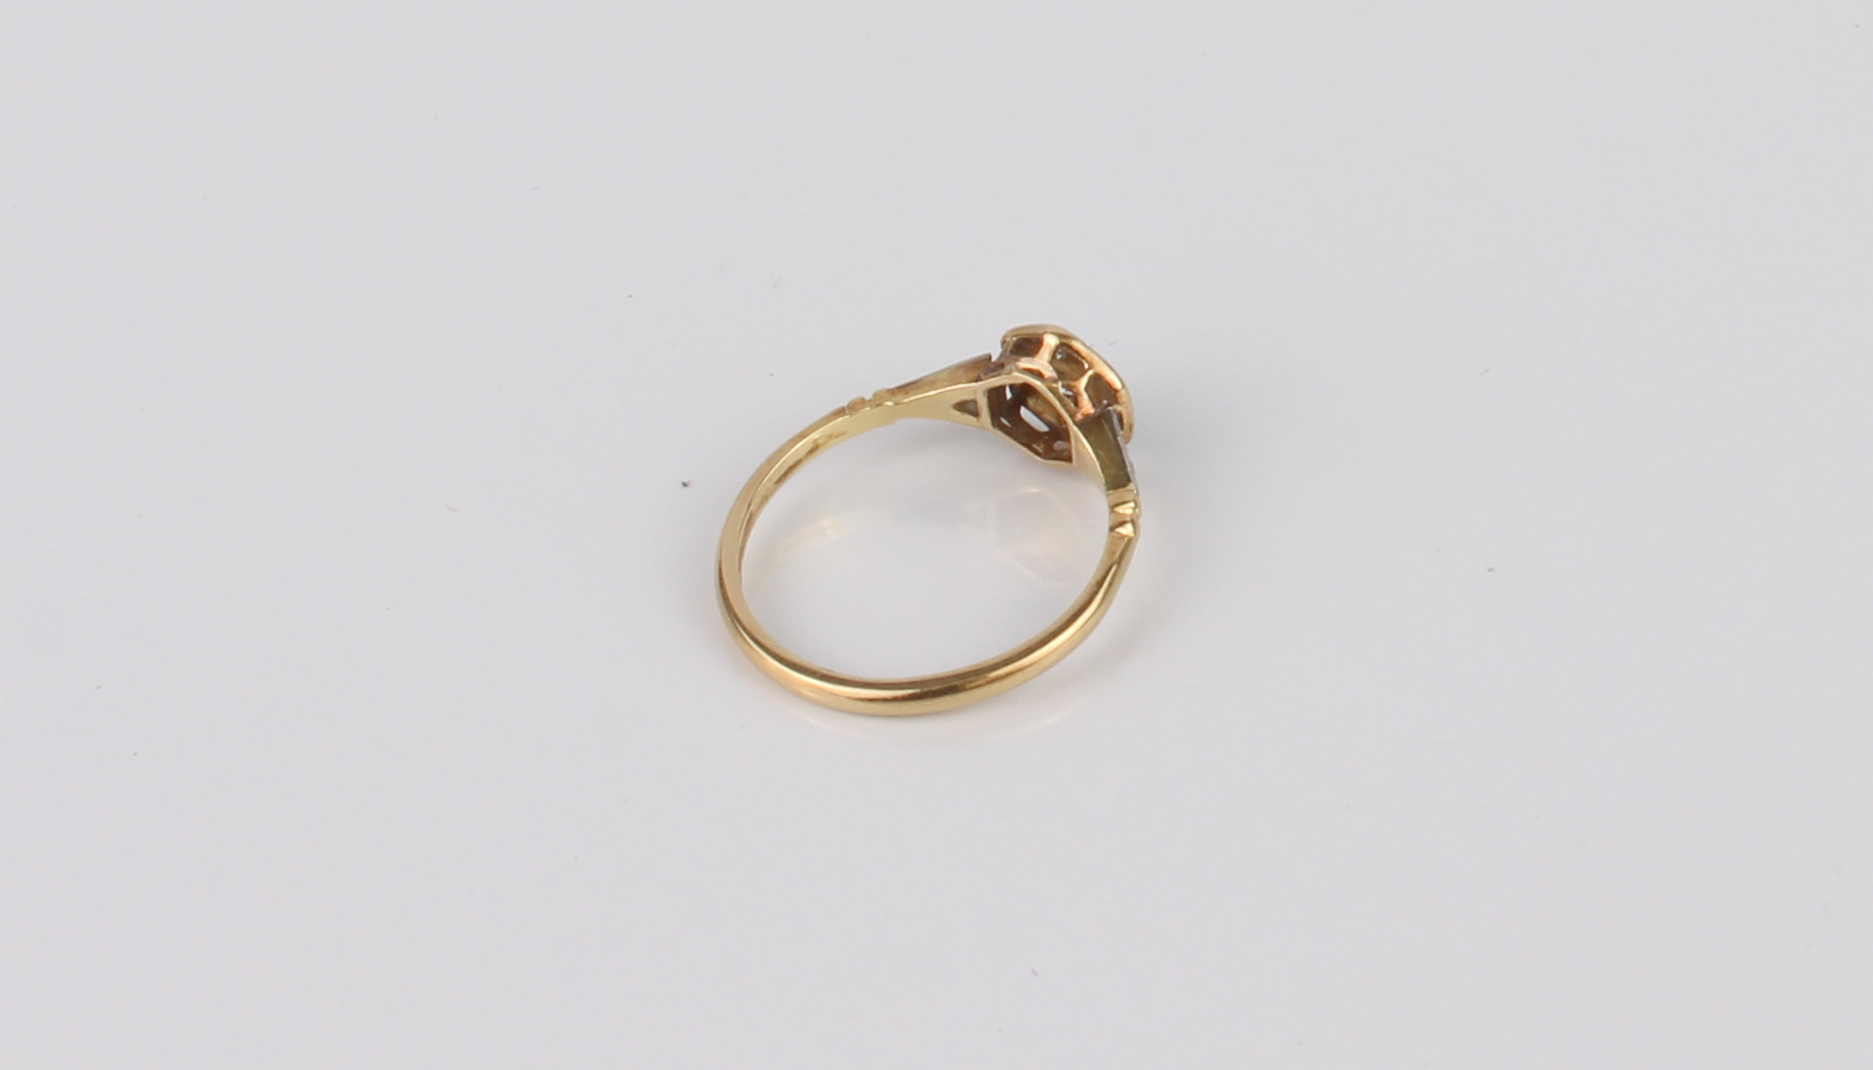 A mid-century 18ct yellow gold and diamond cluster ring - 1930s-40s, unmarked, tests as 18ct gold, - Image 3 of 4